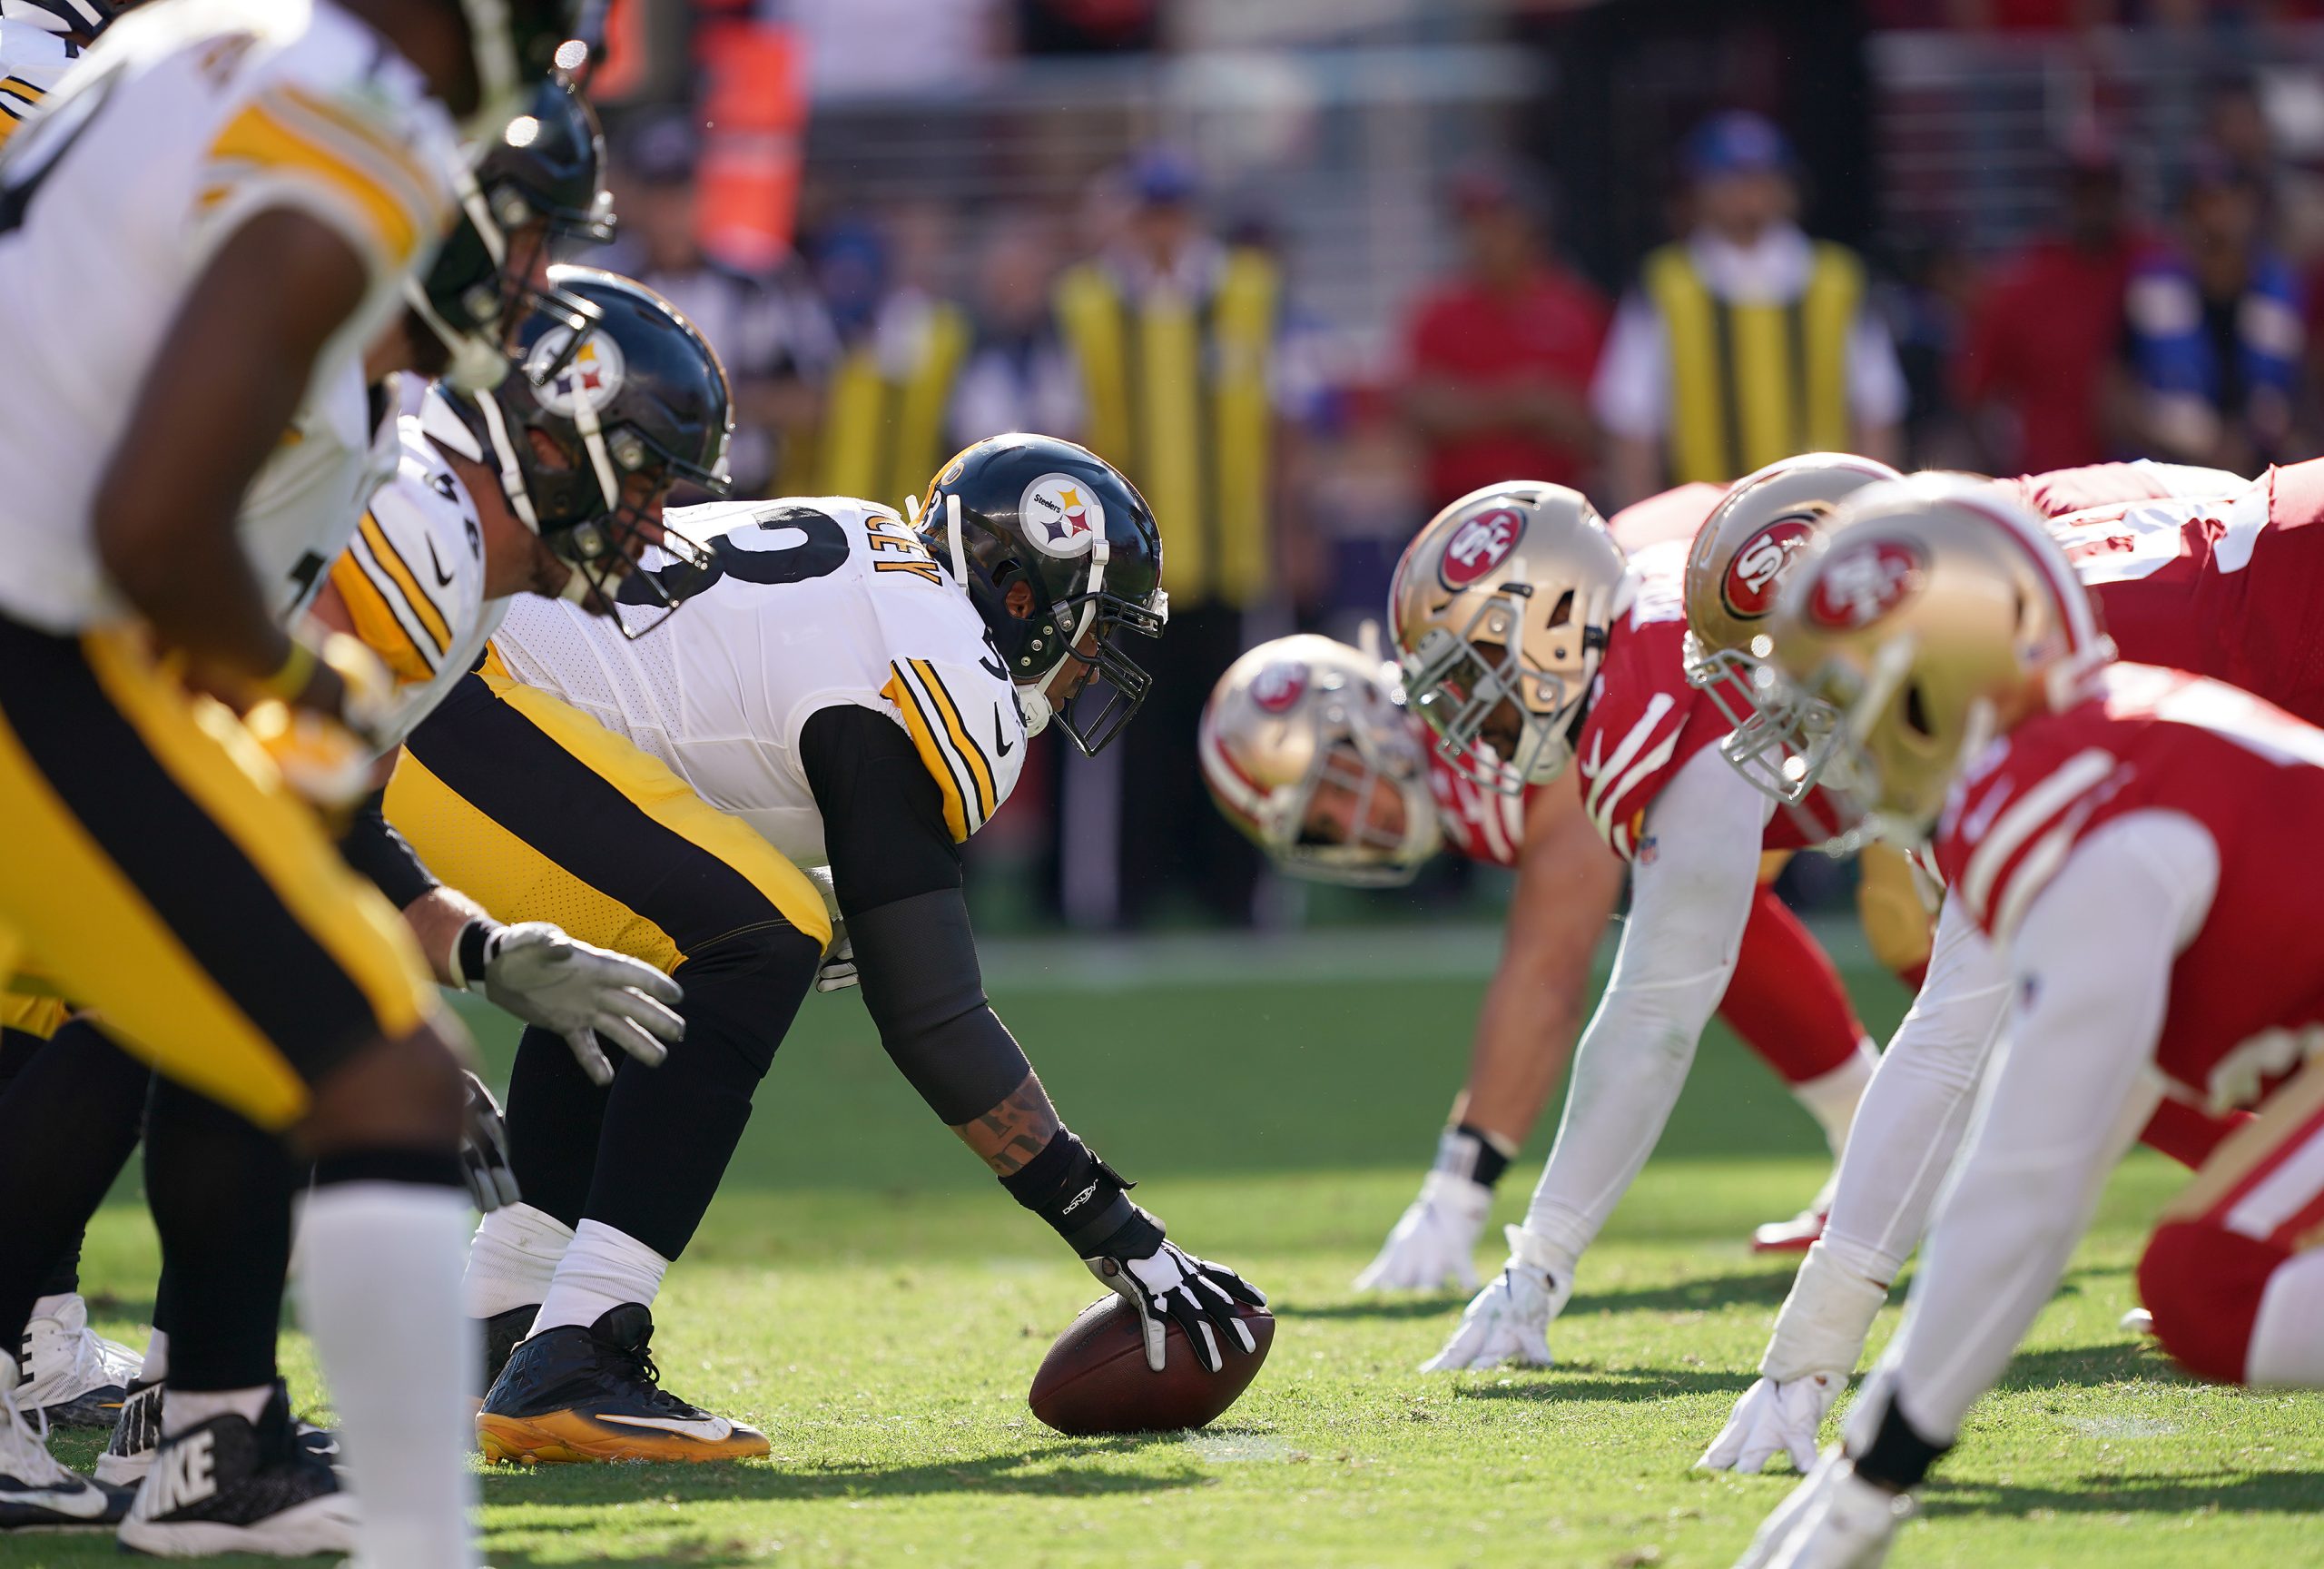 How to Stream the 49ers vs. Steelers Game Live - Week 1